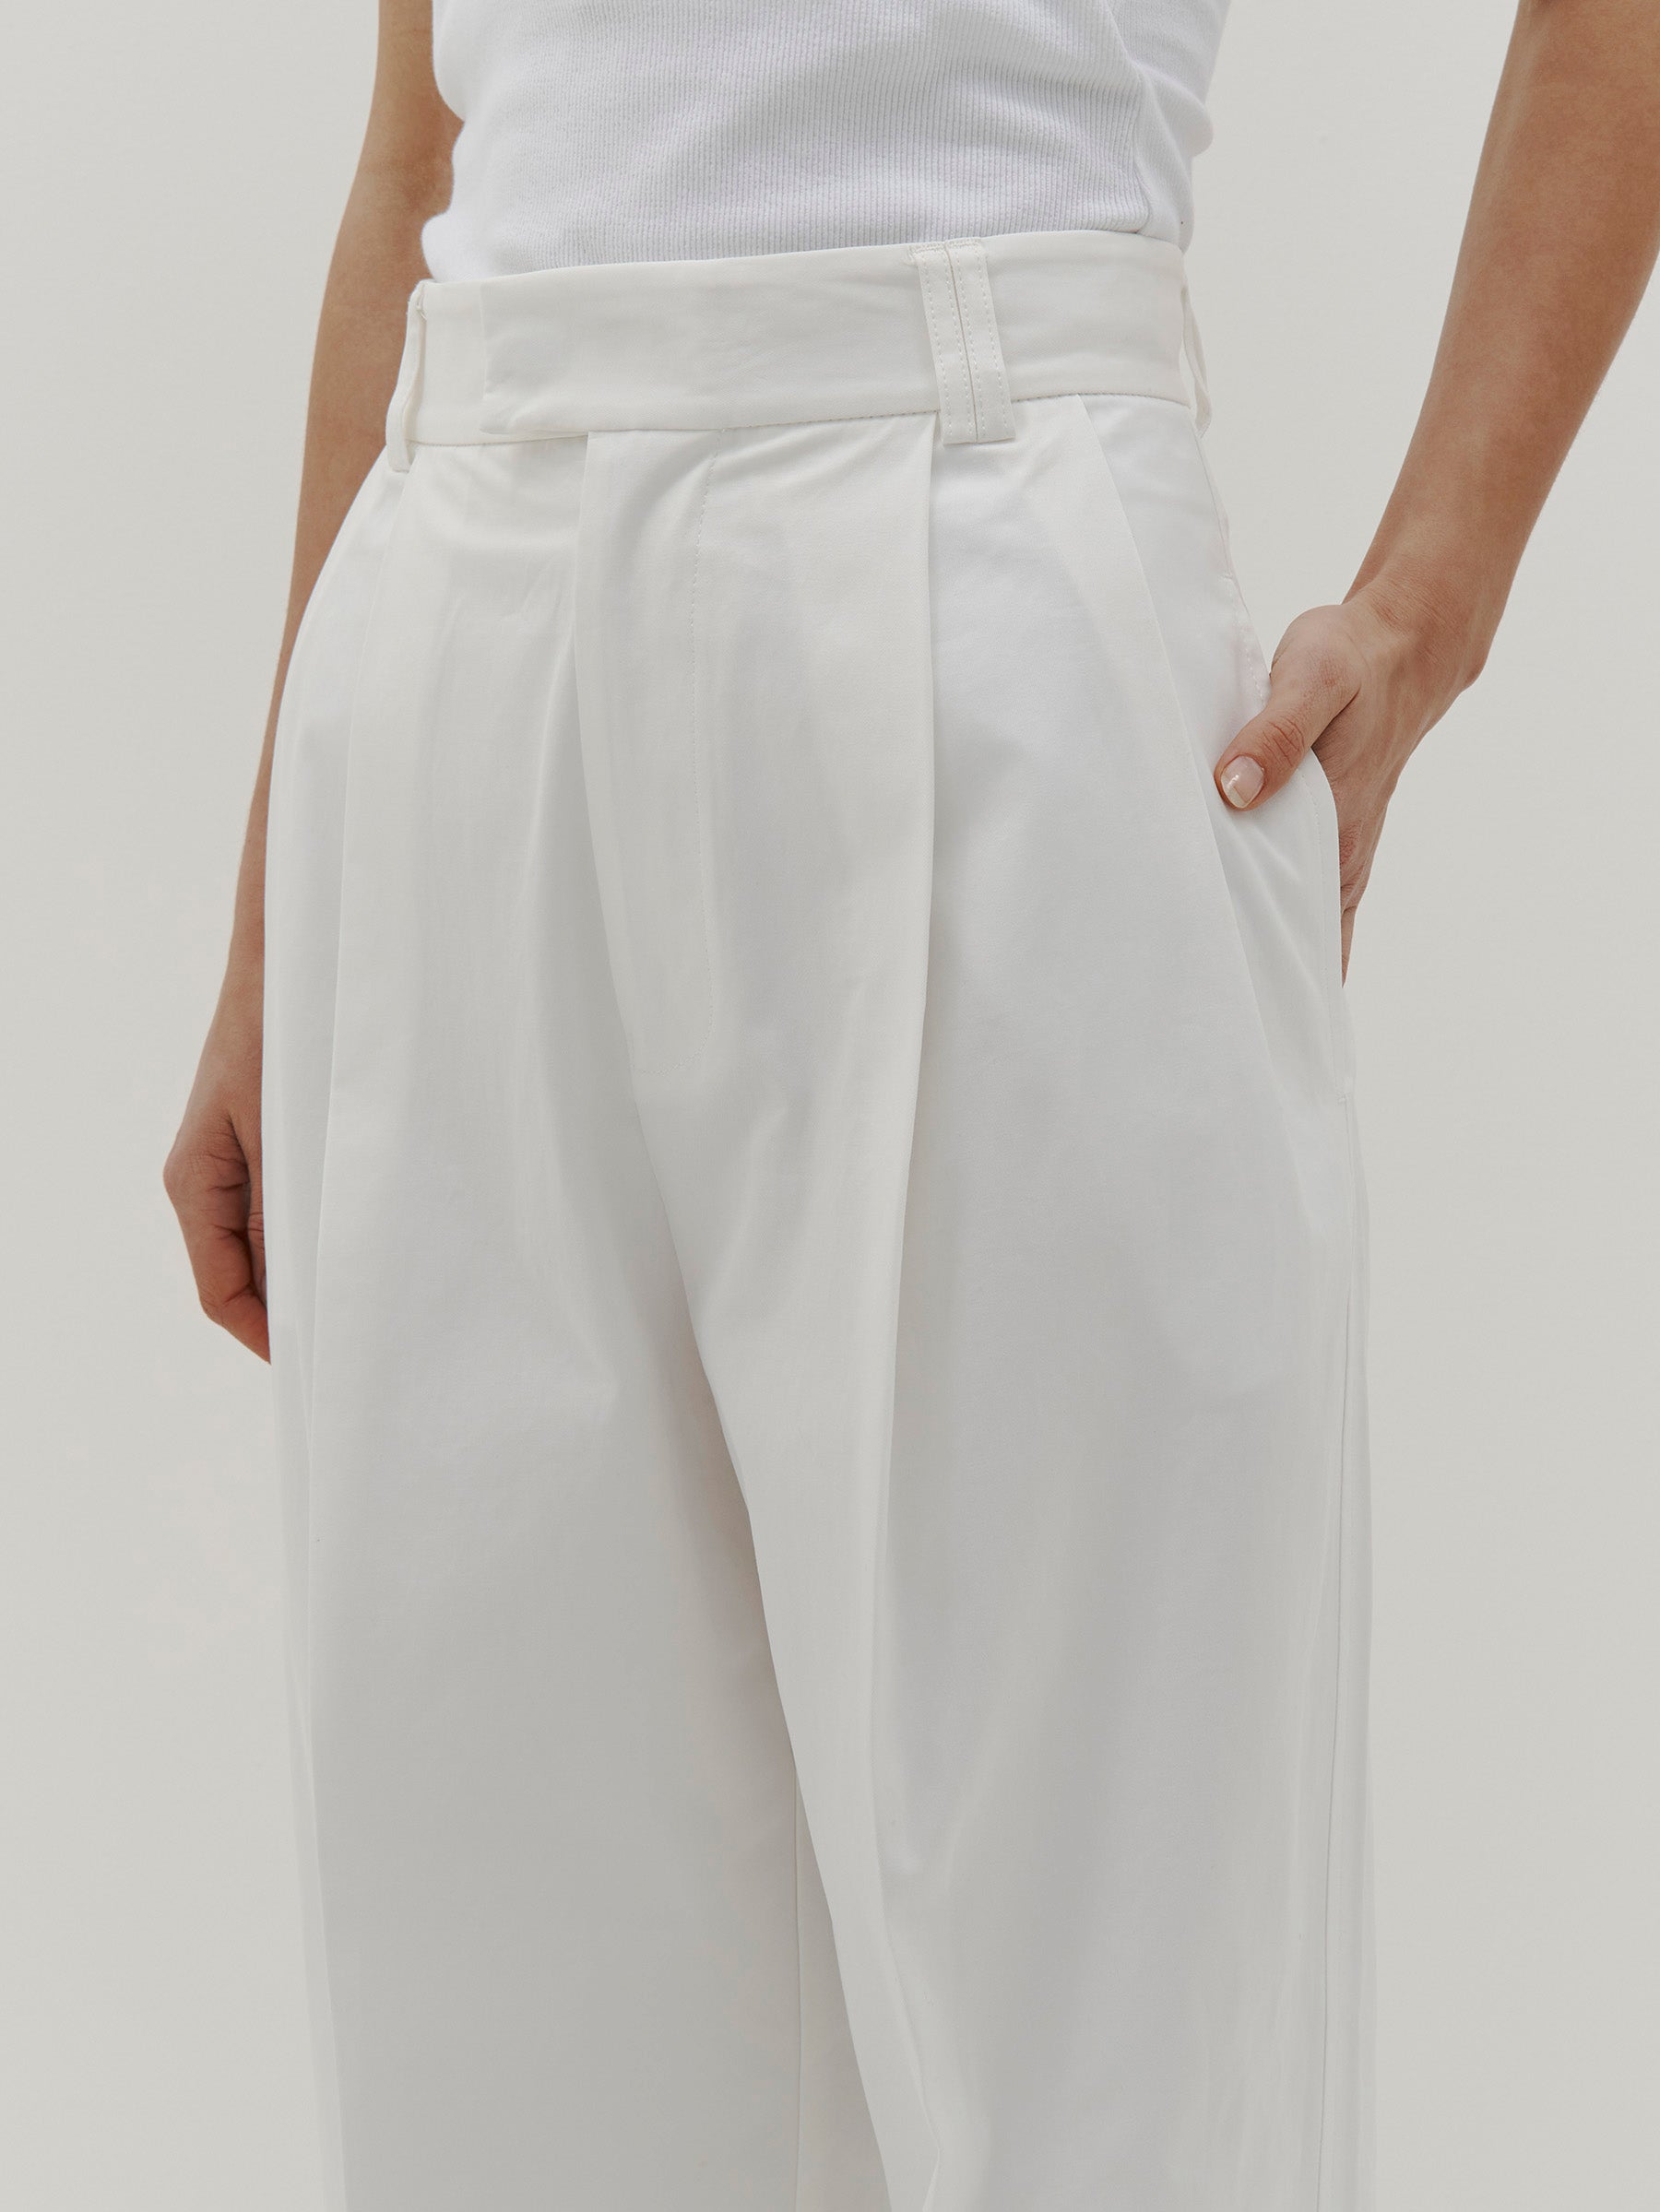 Bassike | Double Cotton Pleated Pant - White